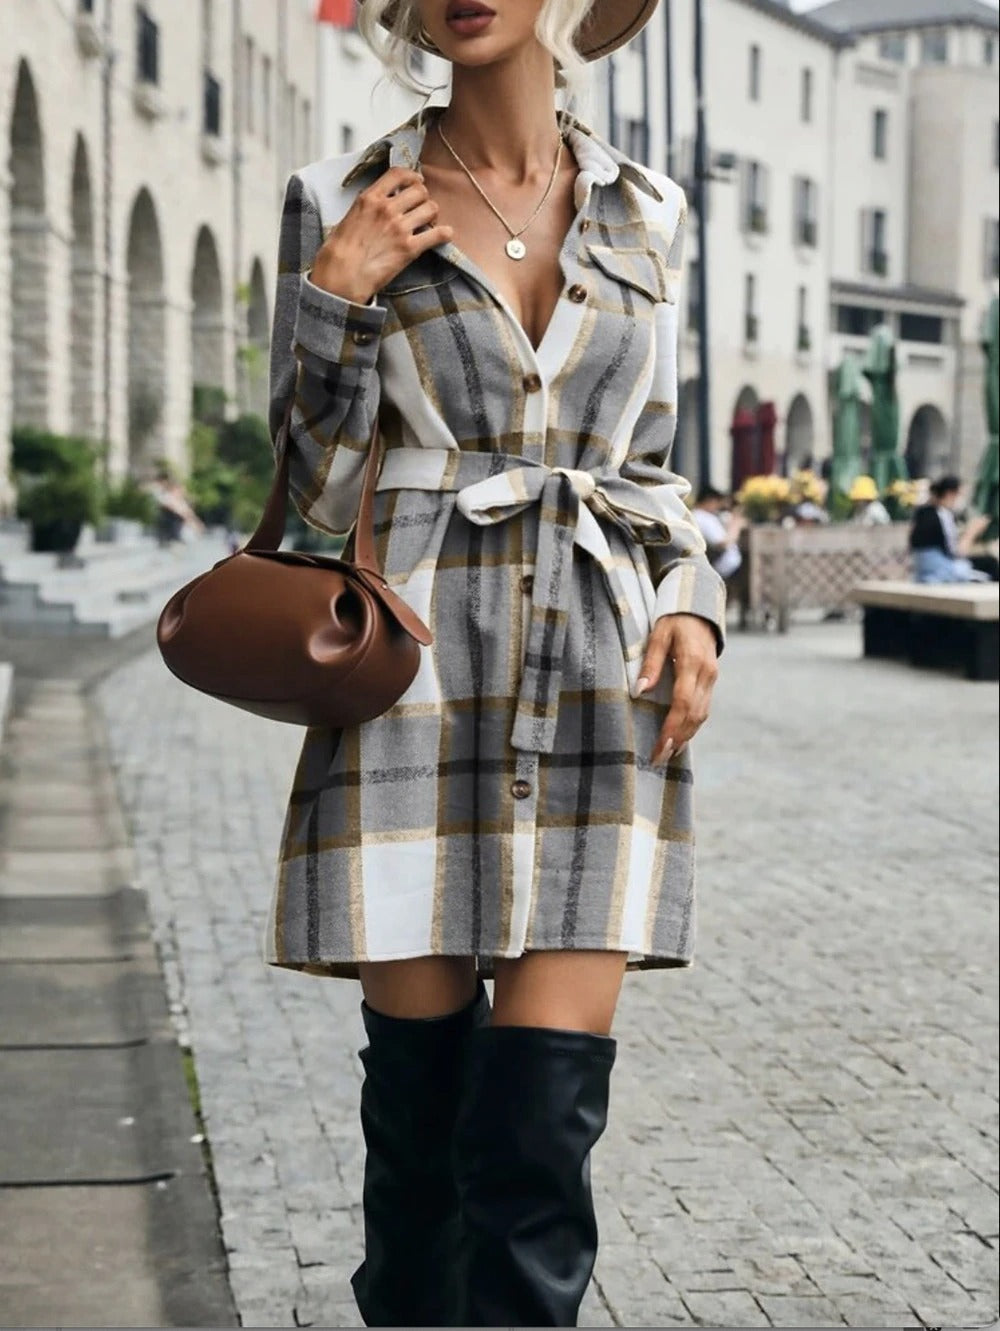 Coco Choose Your Vibe Plaid Belted Shirt Dress Coco dresses